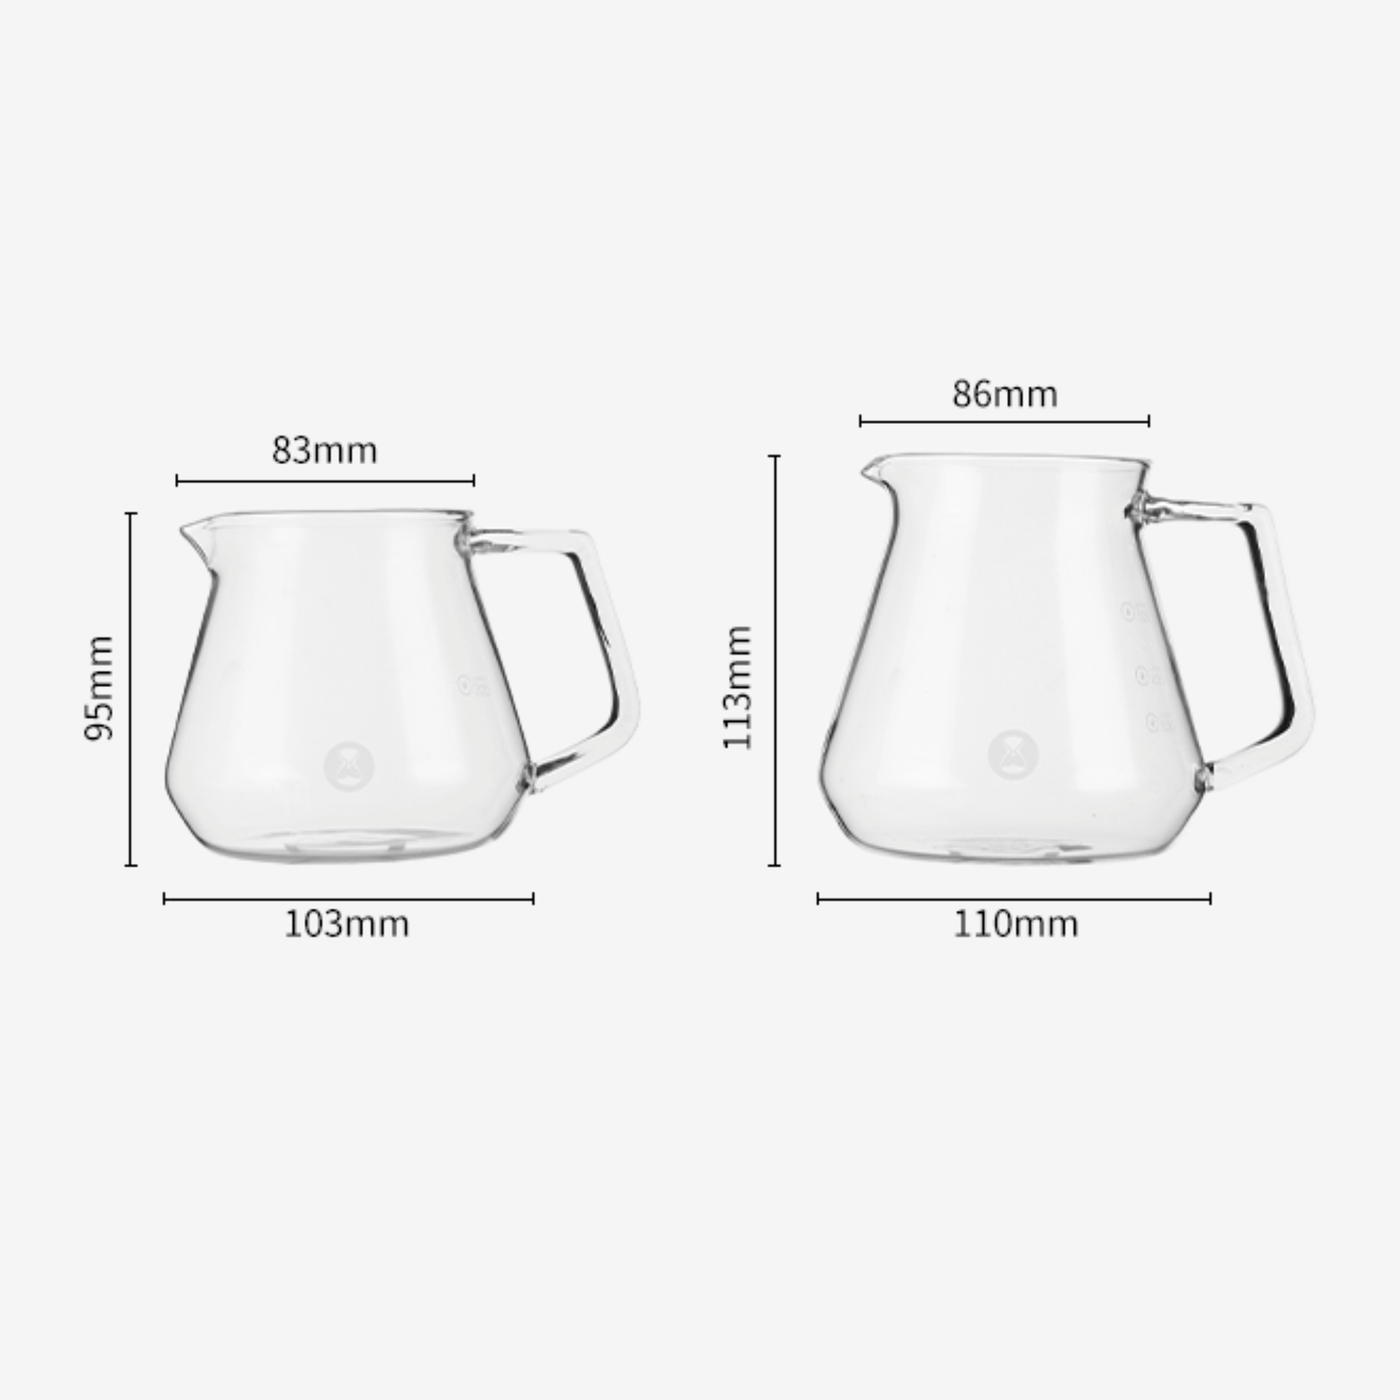 TIMEMORE Coffee Server / Decanters